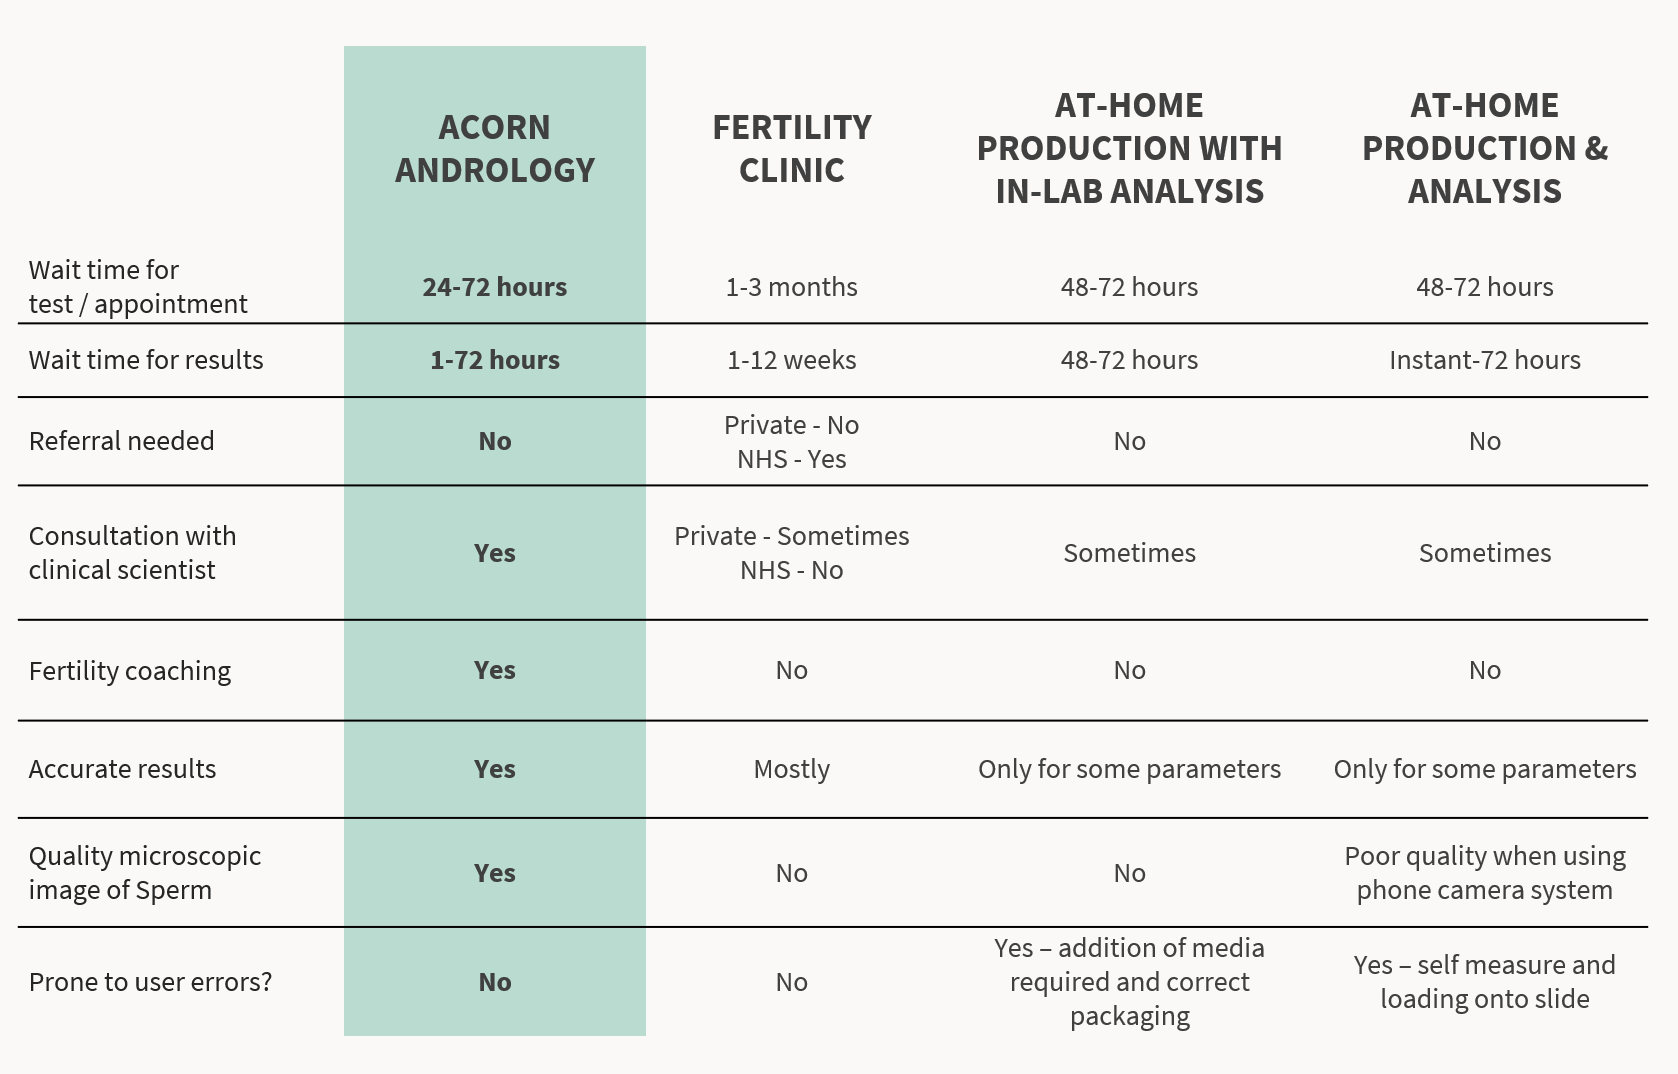 Comparison table featuring side-by-side comparison of Acorn Andrology and 3 other andrology clinics or services.